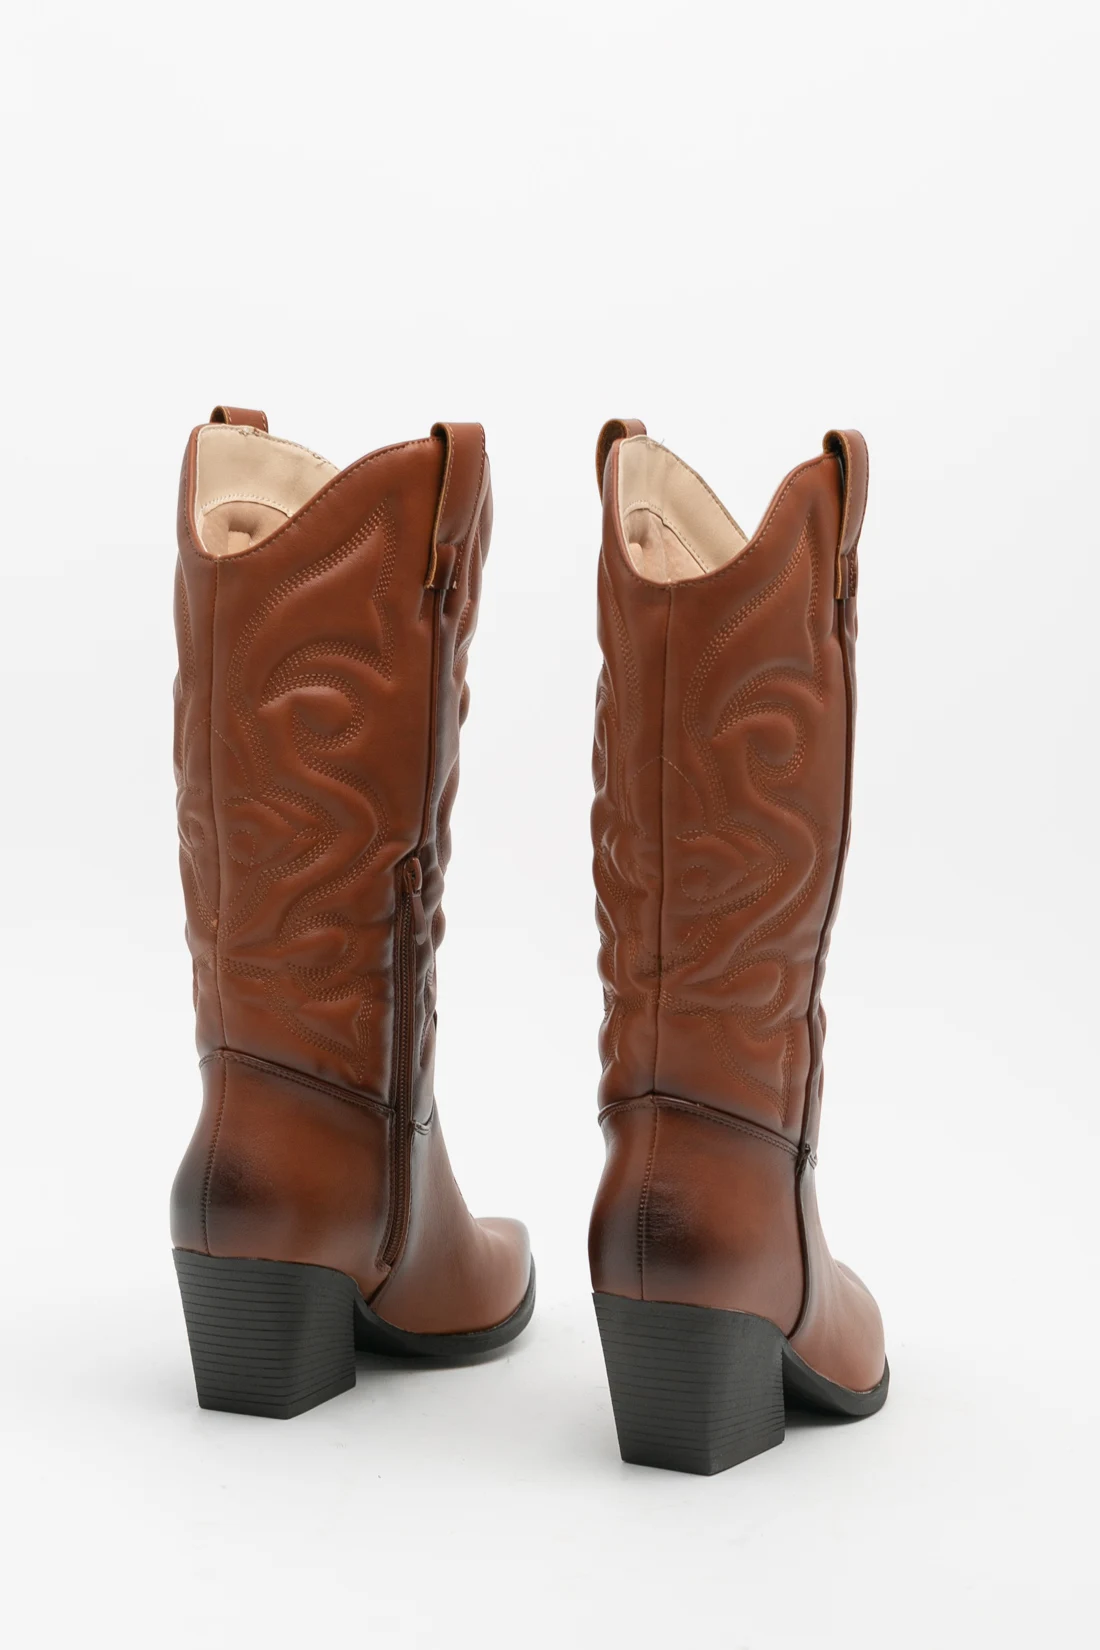 KAYMER COUNTRY BOOT - CAMEL